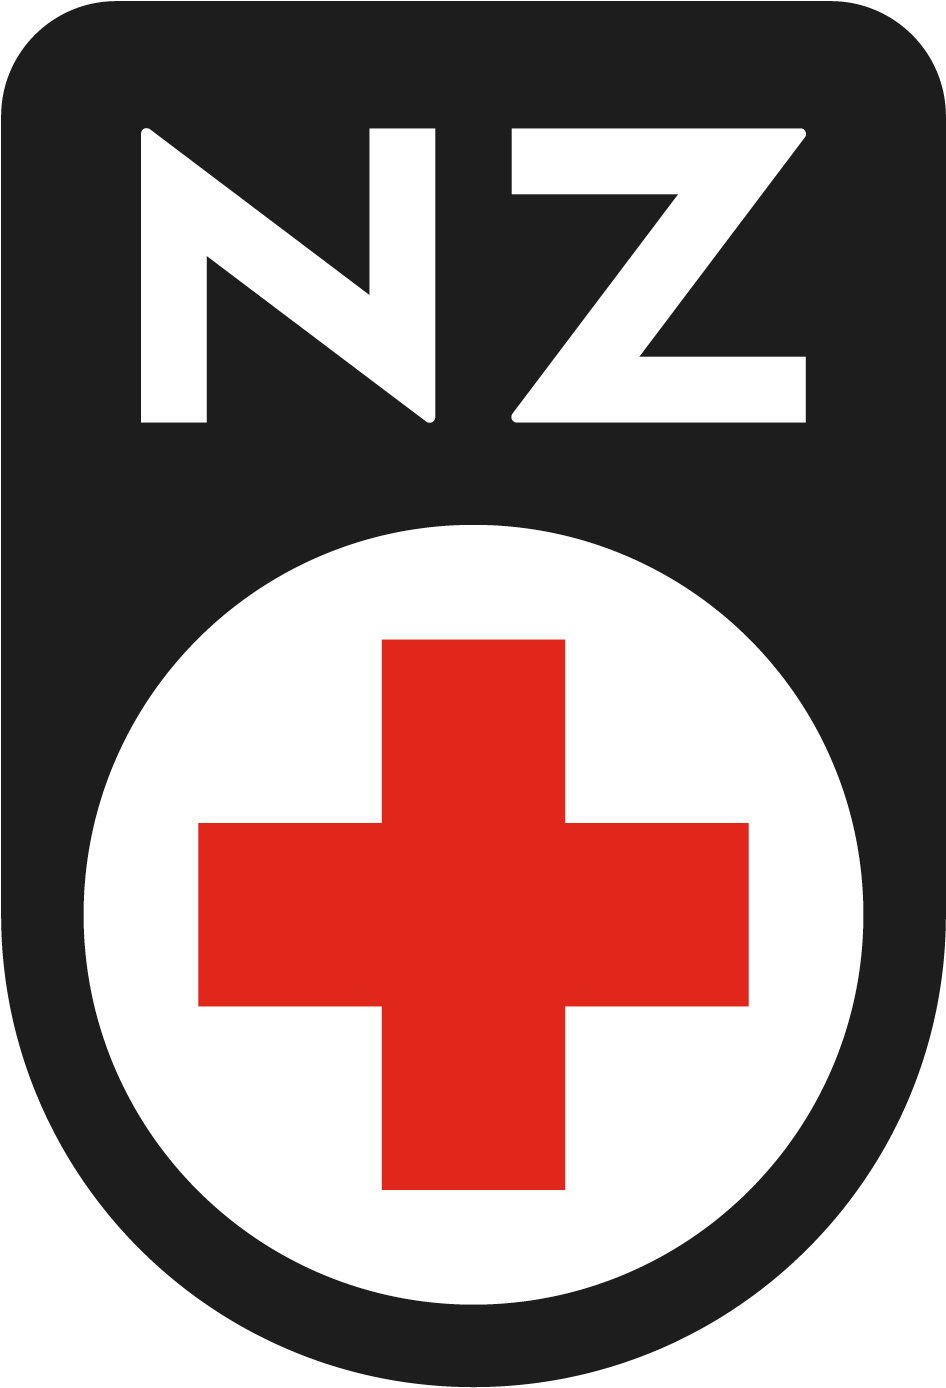 A Red Cross In A Circle